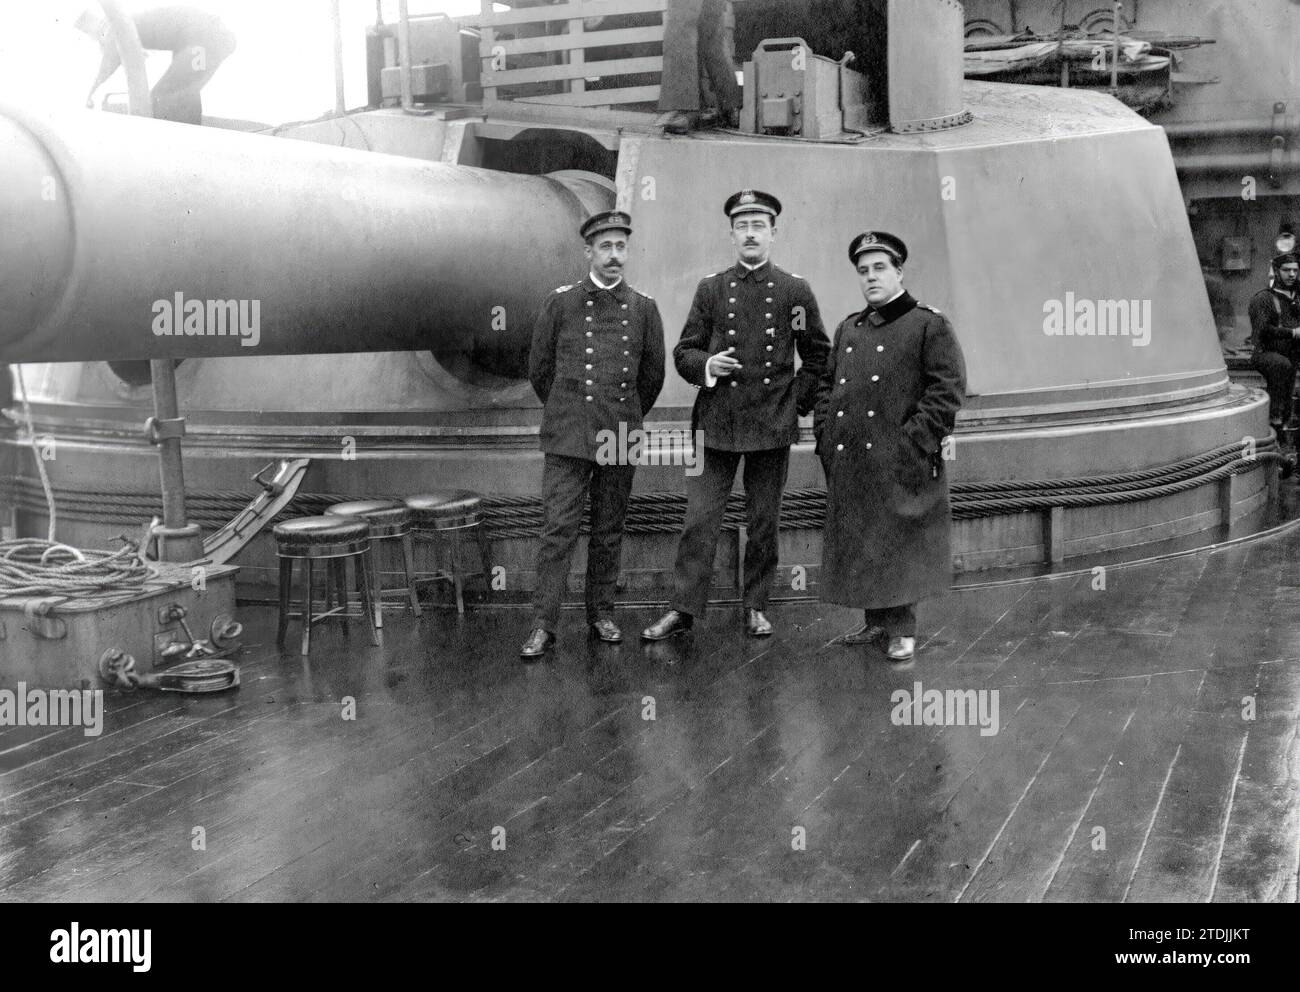 11/30/1915. On board the Battleship 'Alfonso Xiii'. The Officers Messrs. Heras, Franco and Suances, (from left to right) who acquired the ticket with the biggest prize in the Christmas lottery. Photo: Fiol and González -Approximate date. Credit: Album / Archivo ABC / Fiol y González Stock Photo